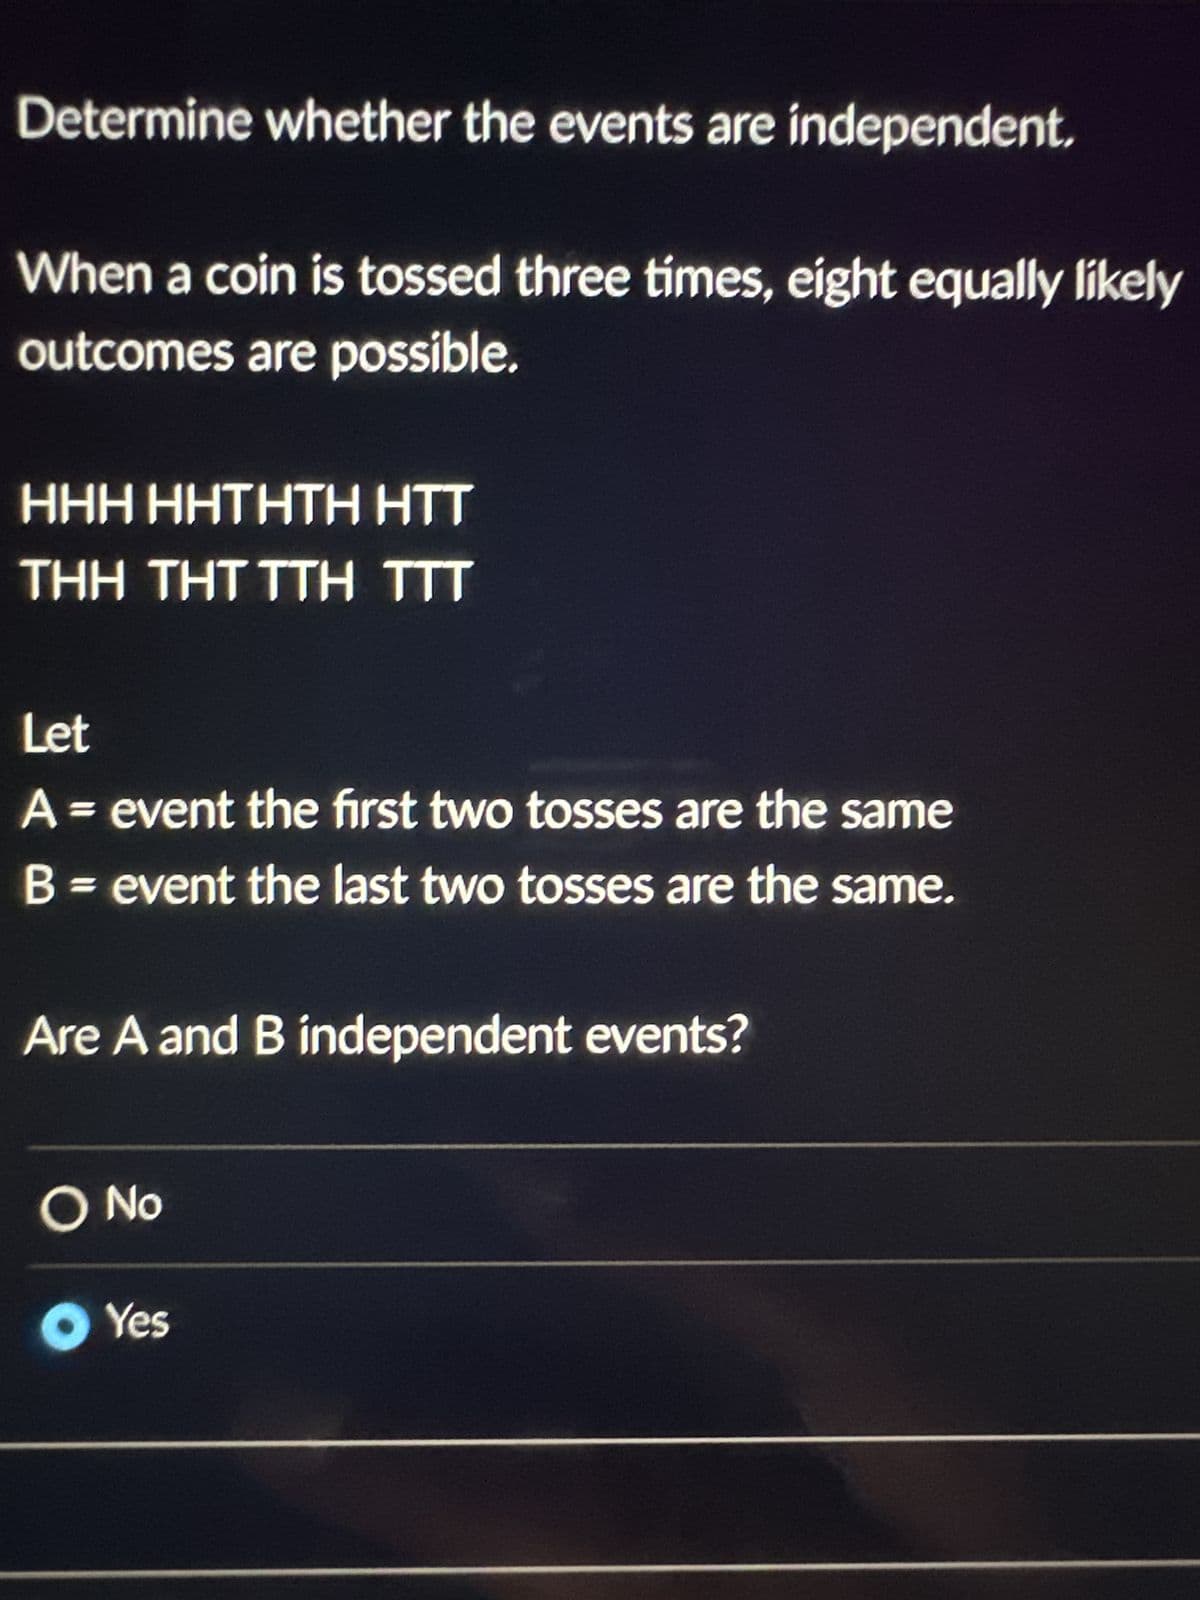 Determine whether the events are independent.
When a coin is tossed three times, eight equally likely
outcomes are possible.
HHH HHTHTH HTT
THH THT TTH TTT
Let
A = event the first two tosses are the same
B = event the last two tosses are the same.
Are A and B independent events?
O No
● Yes